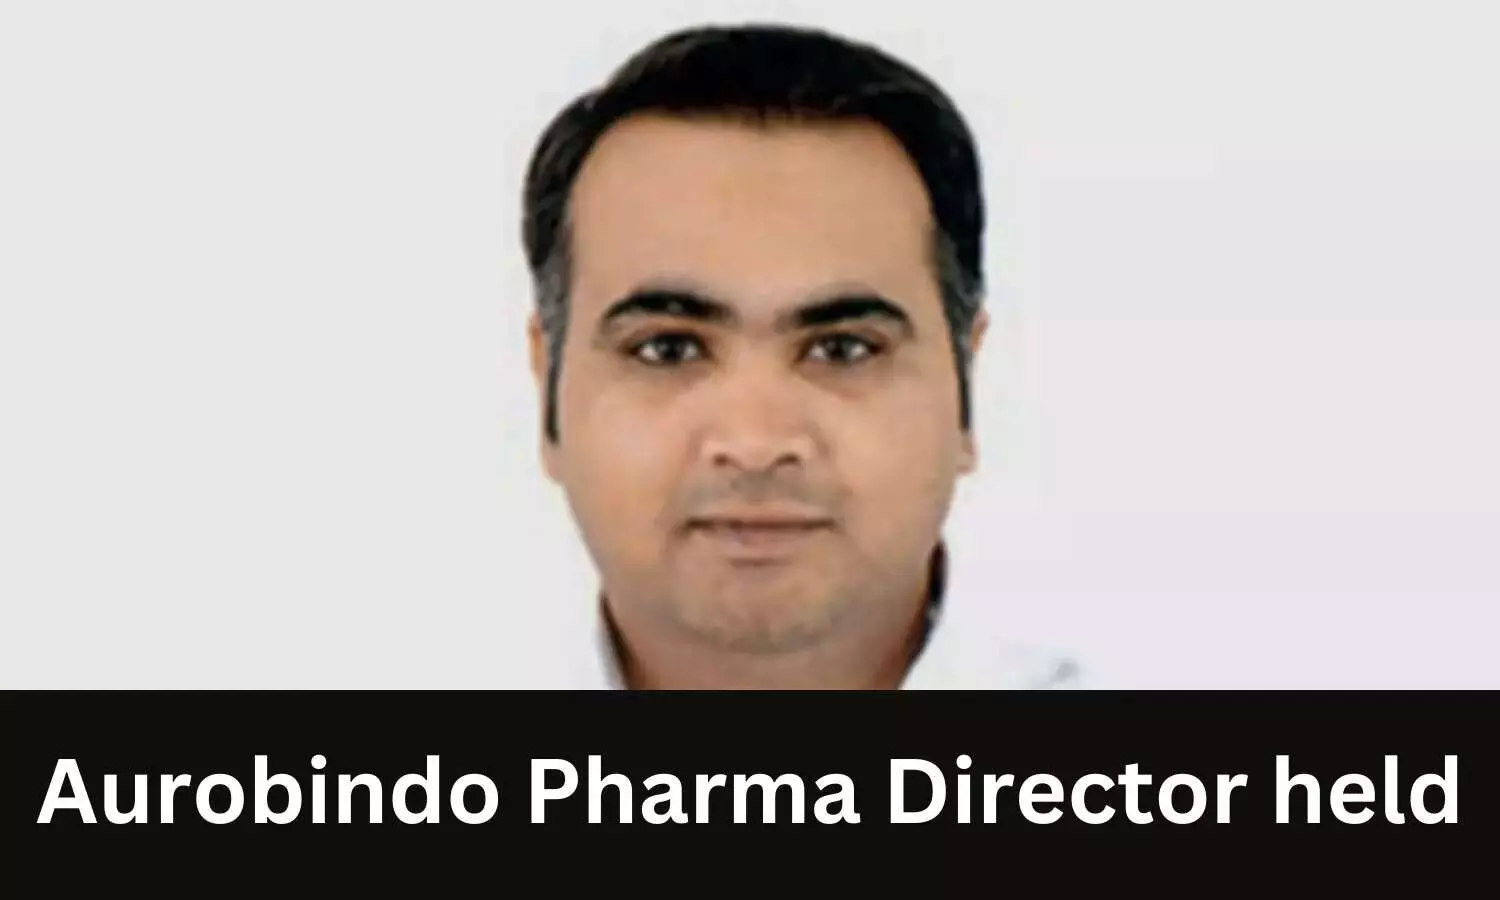 Aurobindo Pharma Director arrested in Delhi excise policy money laundering case